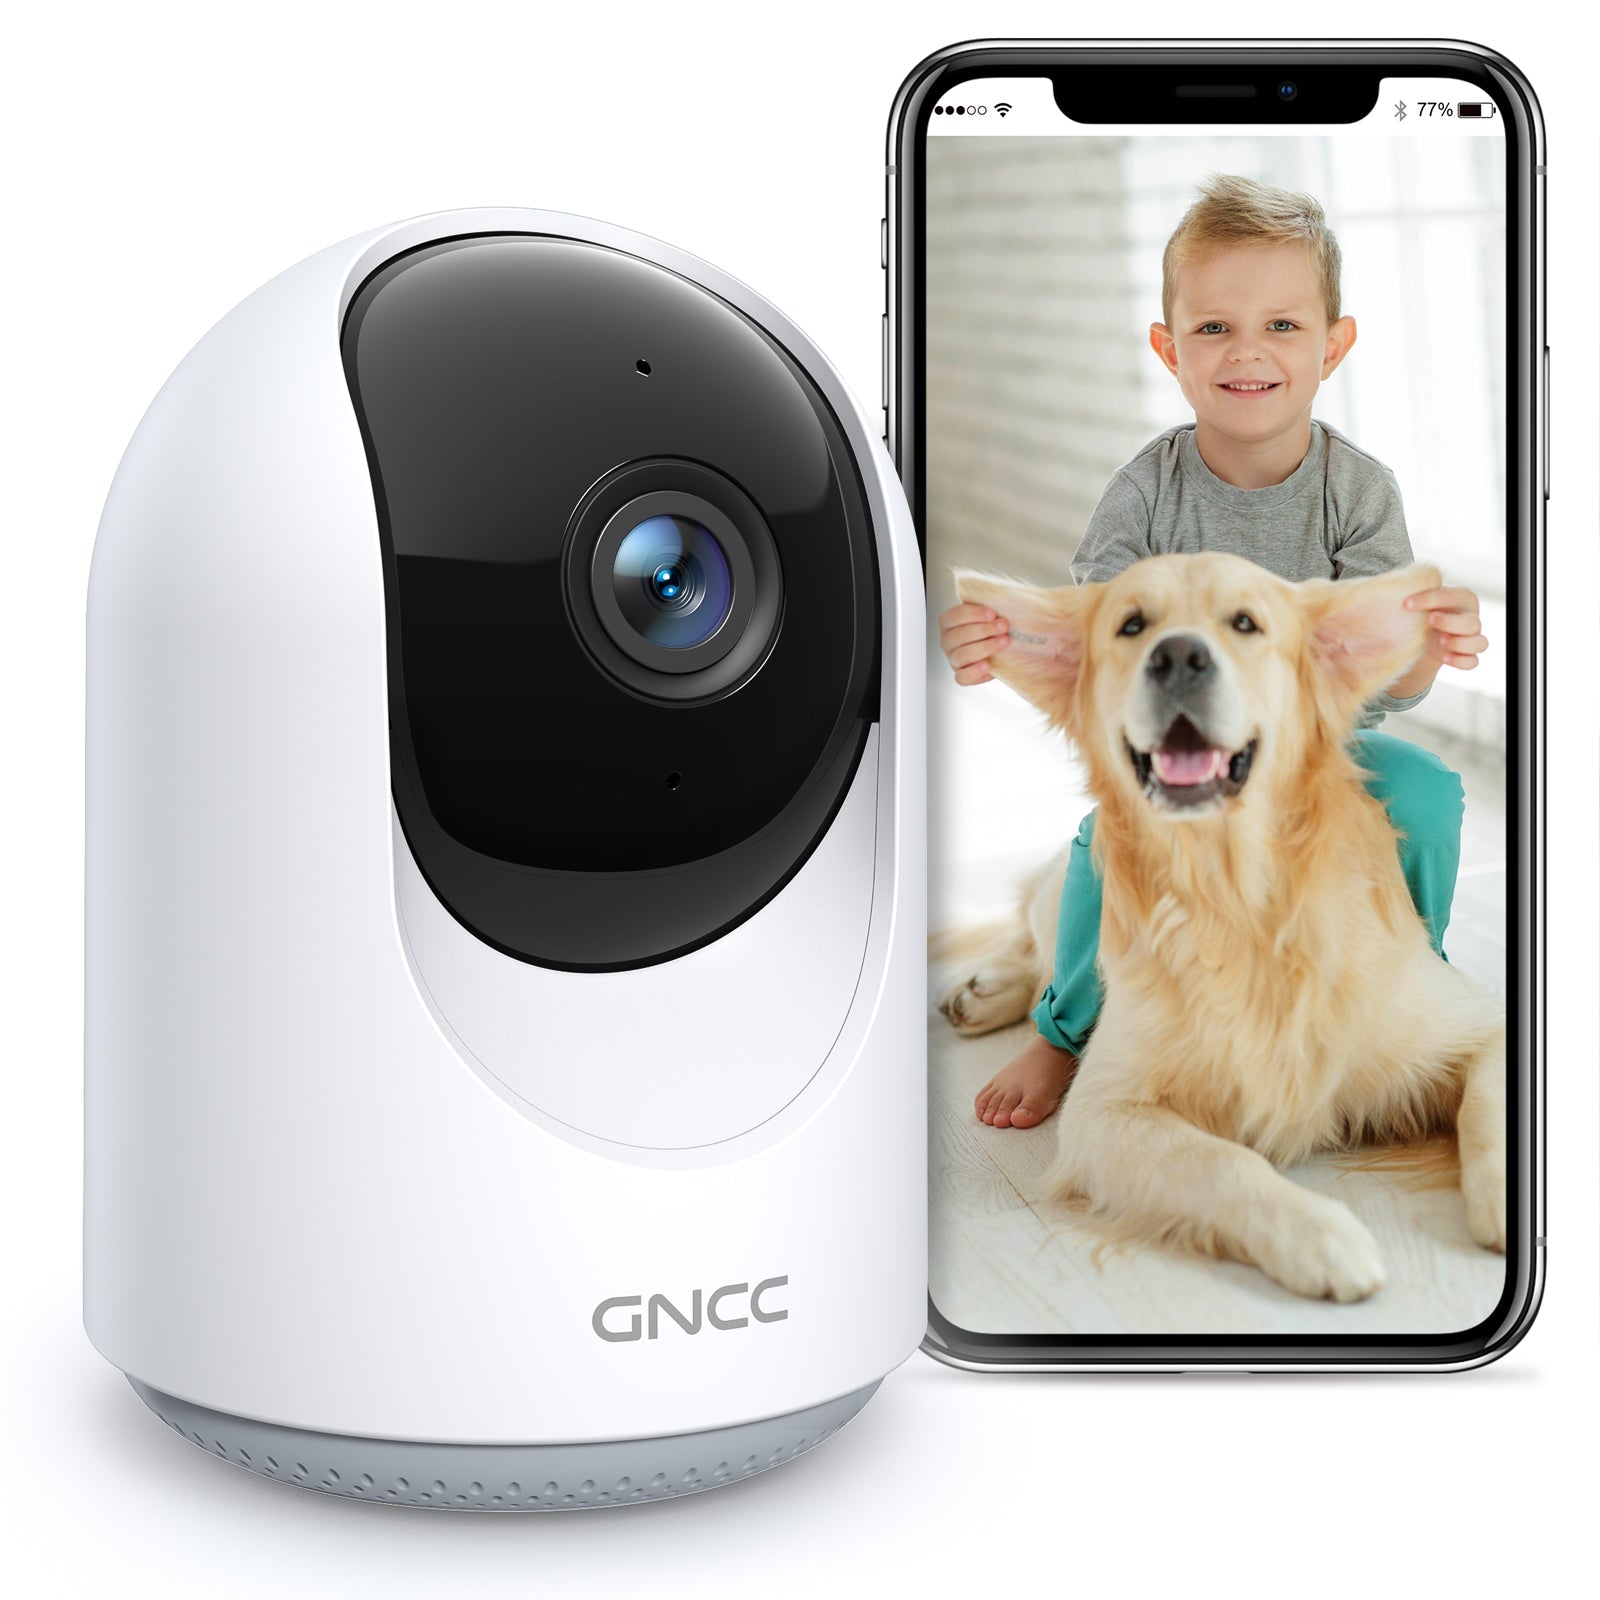 GNCC P1 1080P Indoor Security Camera with Night Vision for Baby/Pet